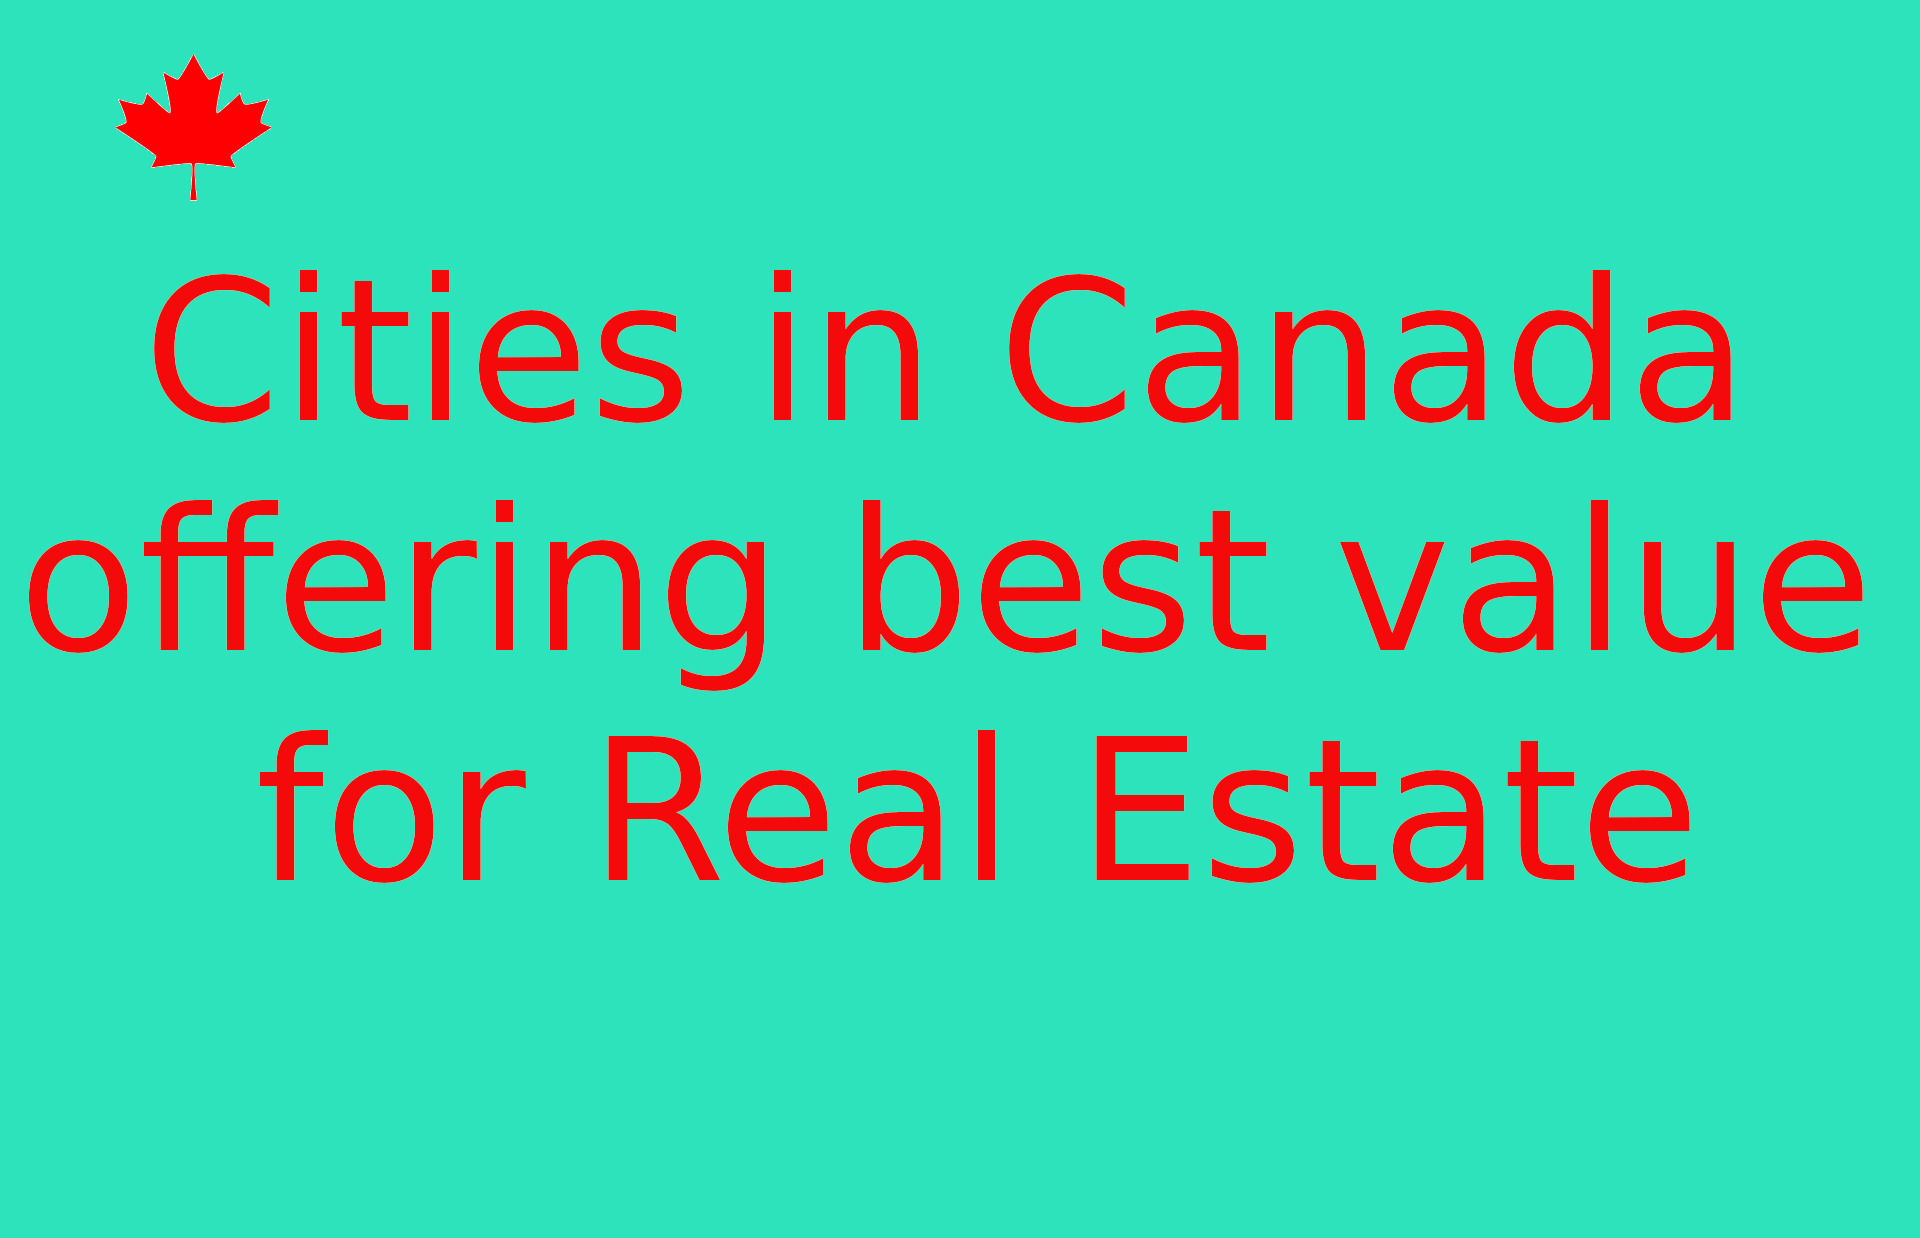 Cities in Canada offering best value for real estate